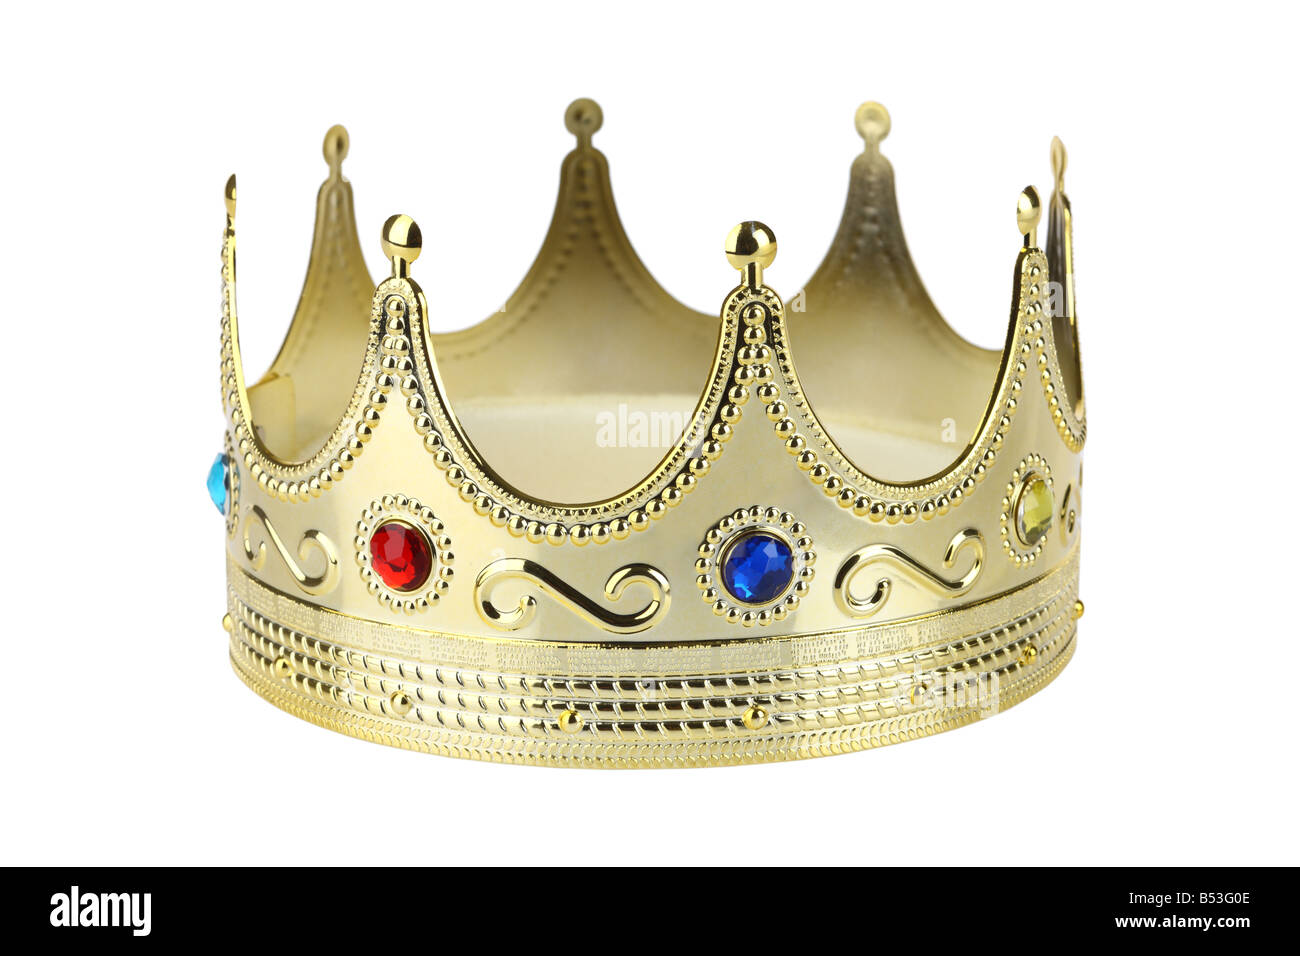 Golden crown cutout isolated on white background Stock Photo